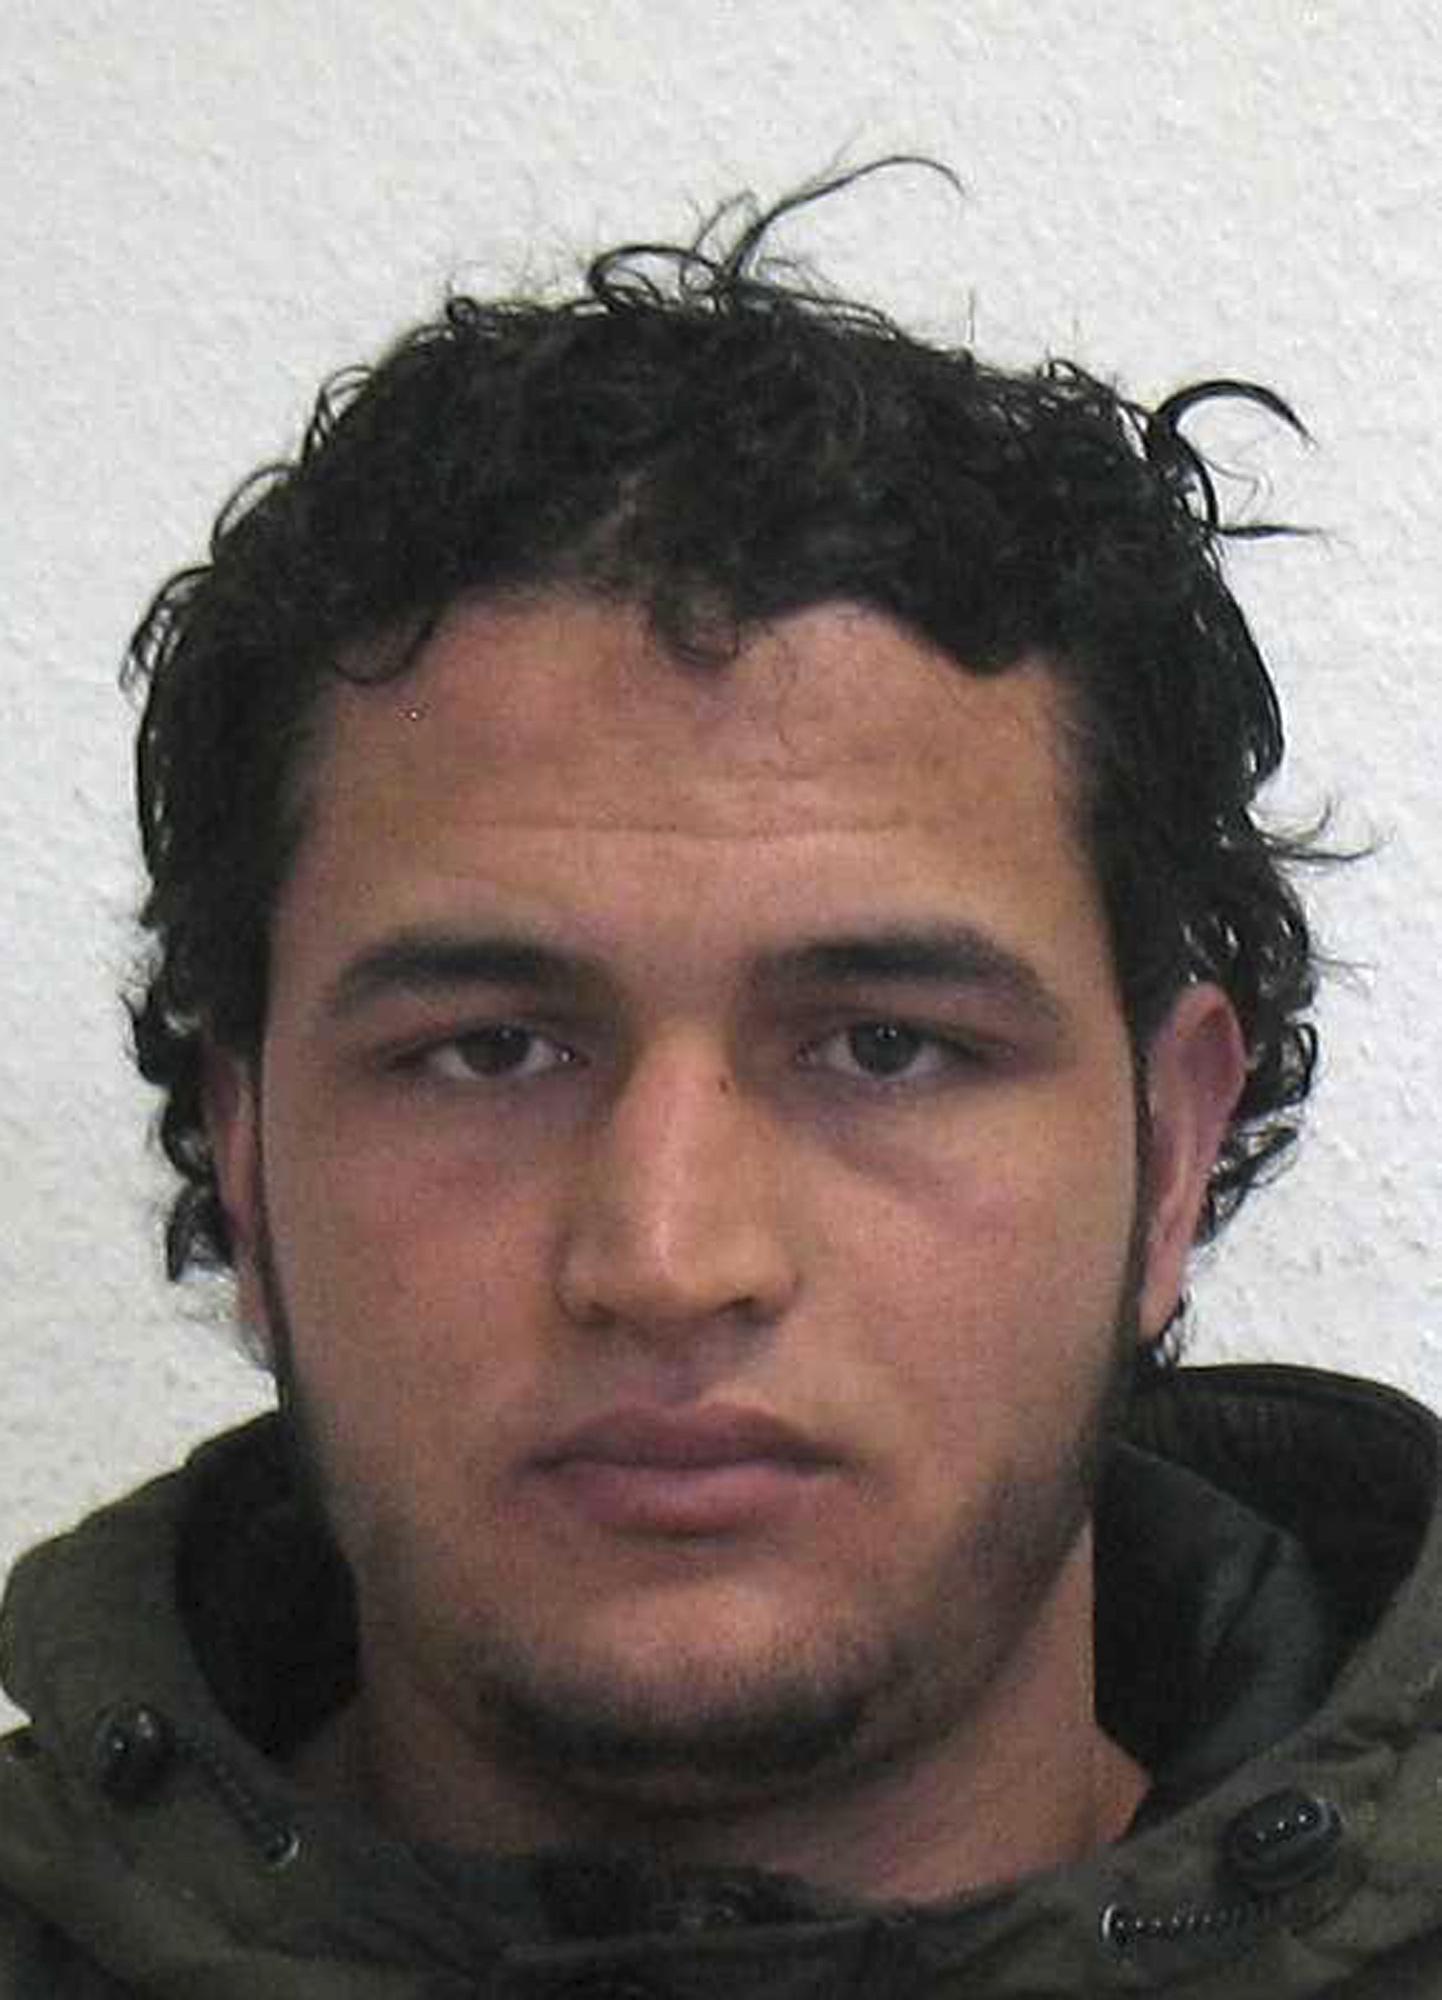 The wanted photo issued by German federal police on Wednesday, Dec. 21, 2016 shows 24-year-old Tunisian Anis Amri who is suspected of being involved in the fatal attack on the Christmas market in Berlin on Dec. 19, 2016. German authorities are offering a reward of up to 100,000 euros ($105,000) for the arrest of the Tunisian. (German police via AP) ORG XMIT: FOS804